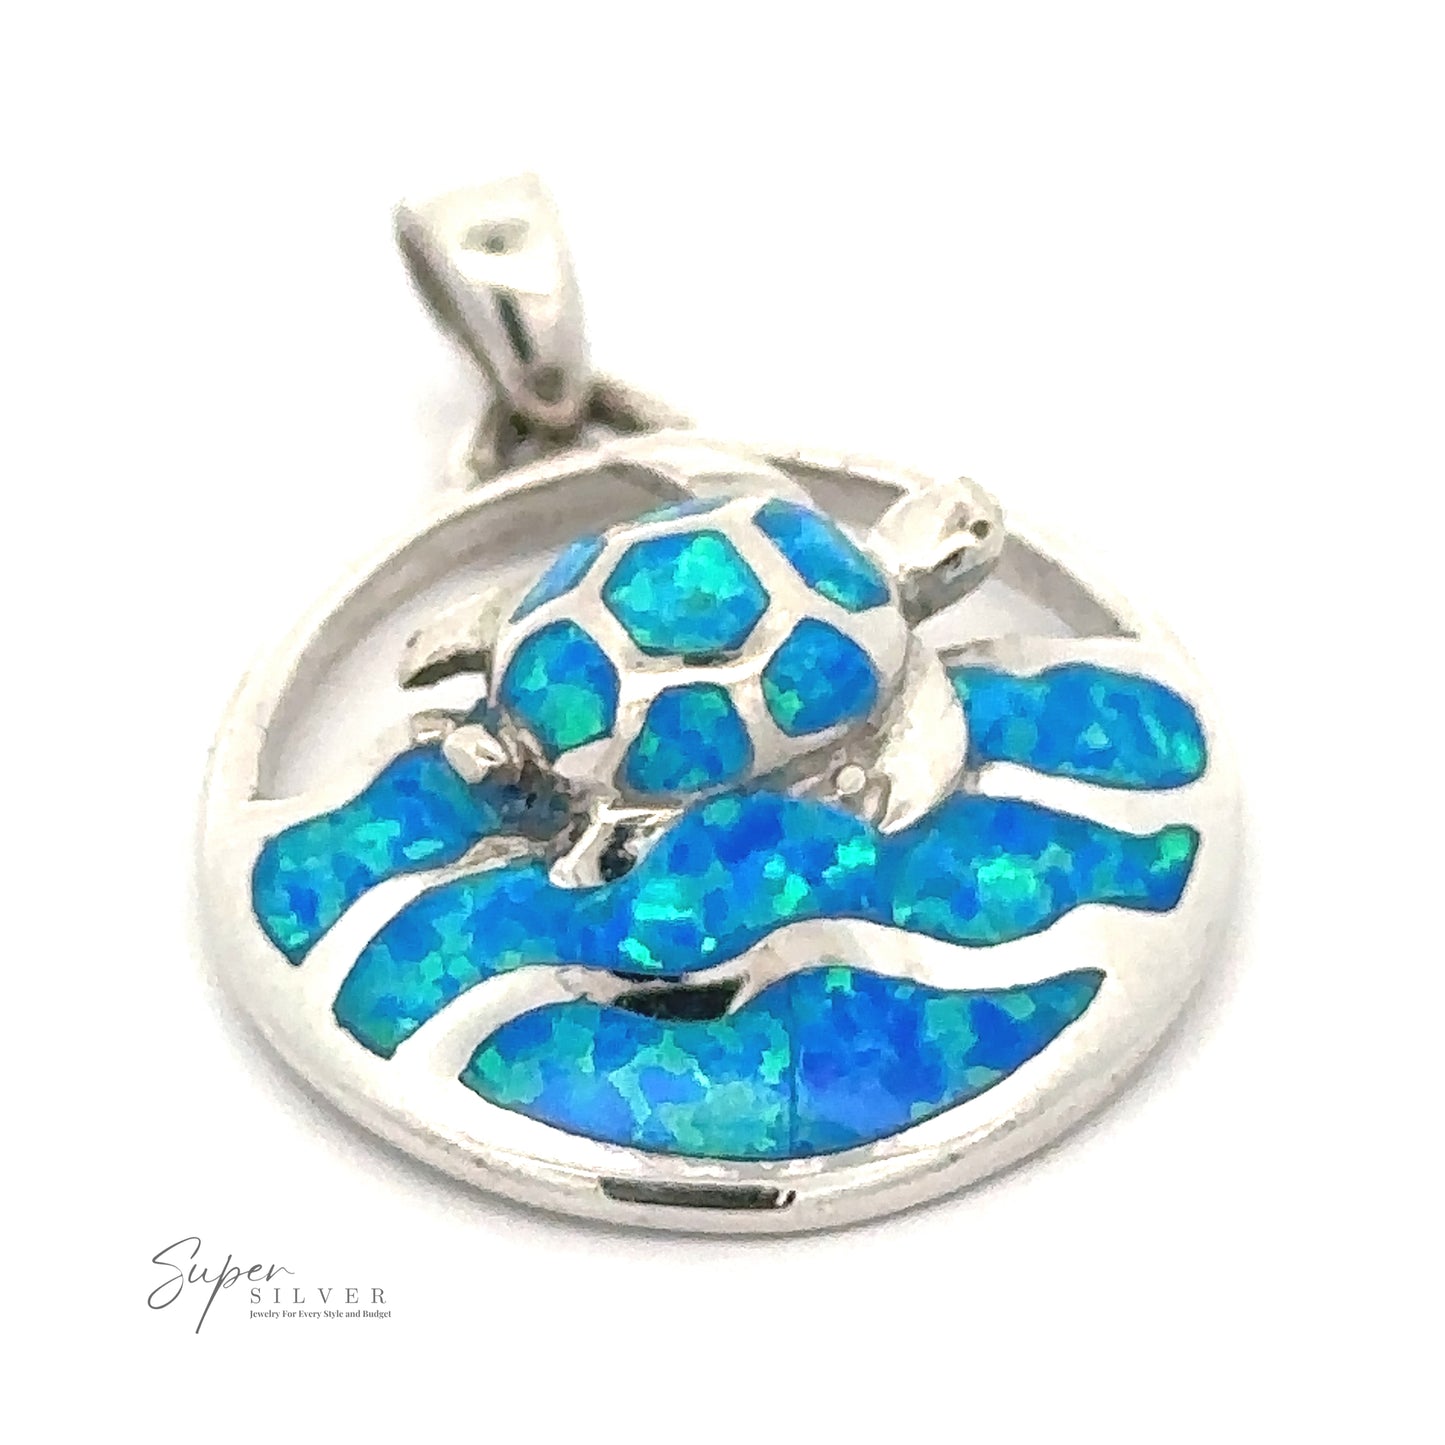 
                  
                    A Blue Opal Sea Turtle Pendant featuring a sea turtle with blue opal inlays on its shell and water waves. "Super Silver" is inscribed on the bottom left, making it a perfect piece of oceanic jewelry.
                  
                